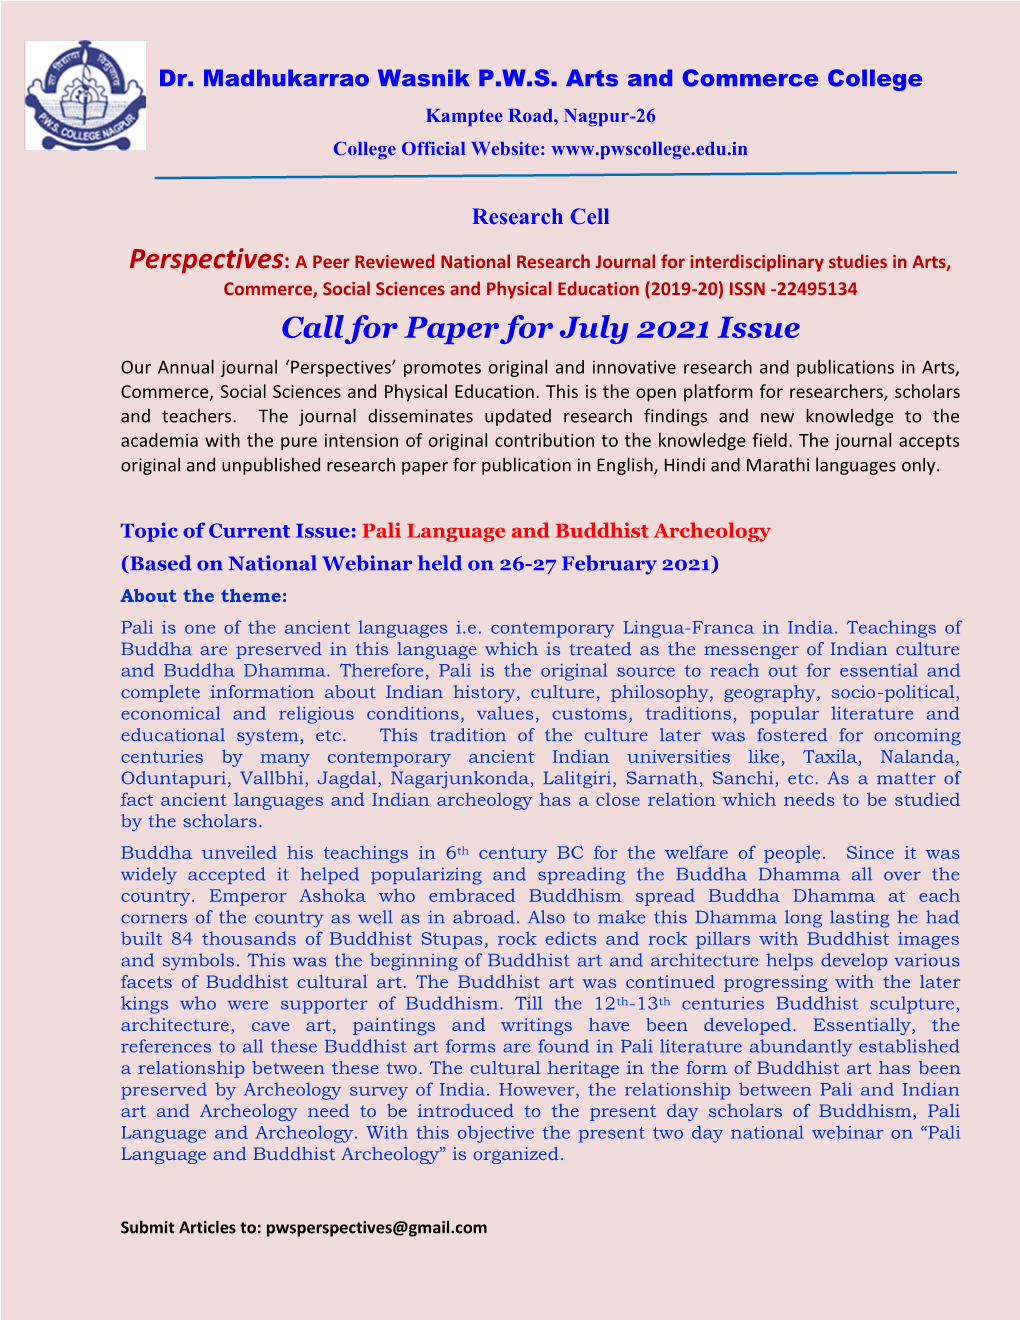 Call for Paper for July 2021 Issue